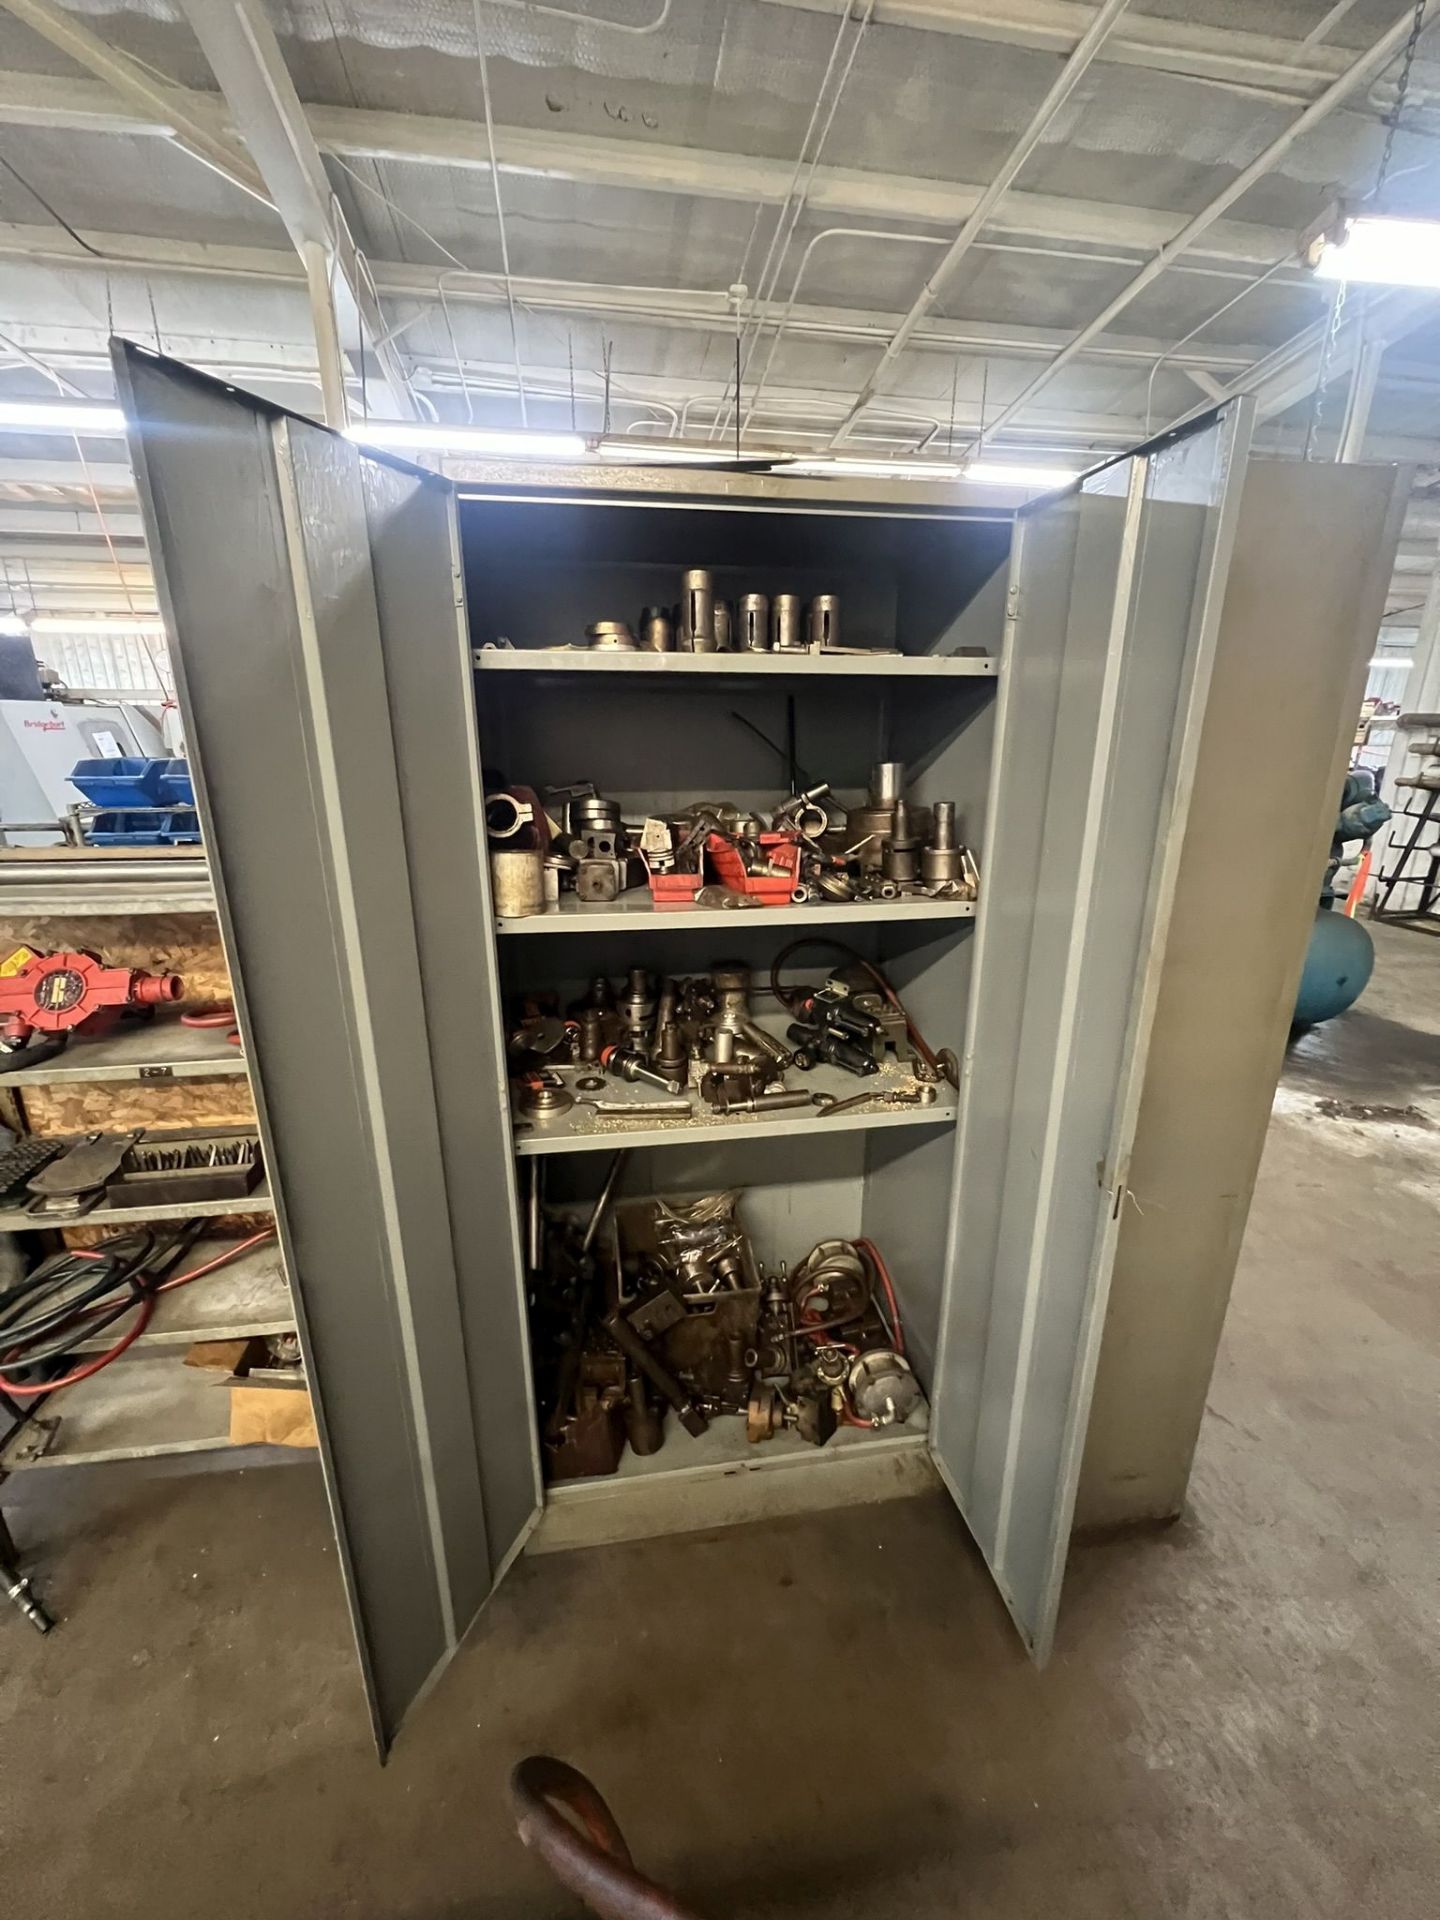 6ft Metal Storage Cabinet & Contents of Dies, Tooling